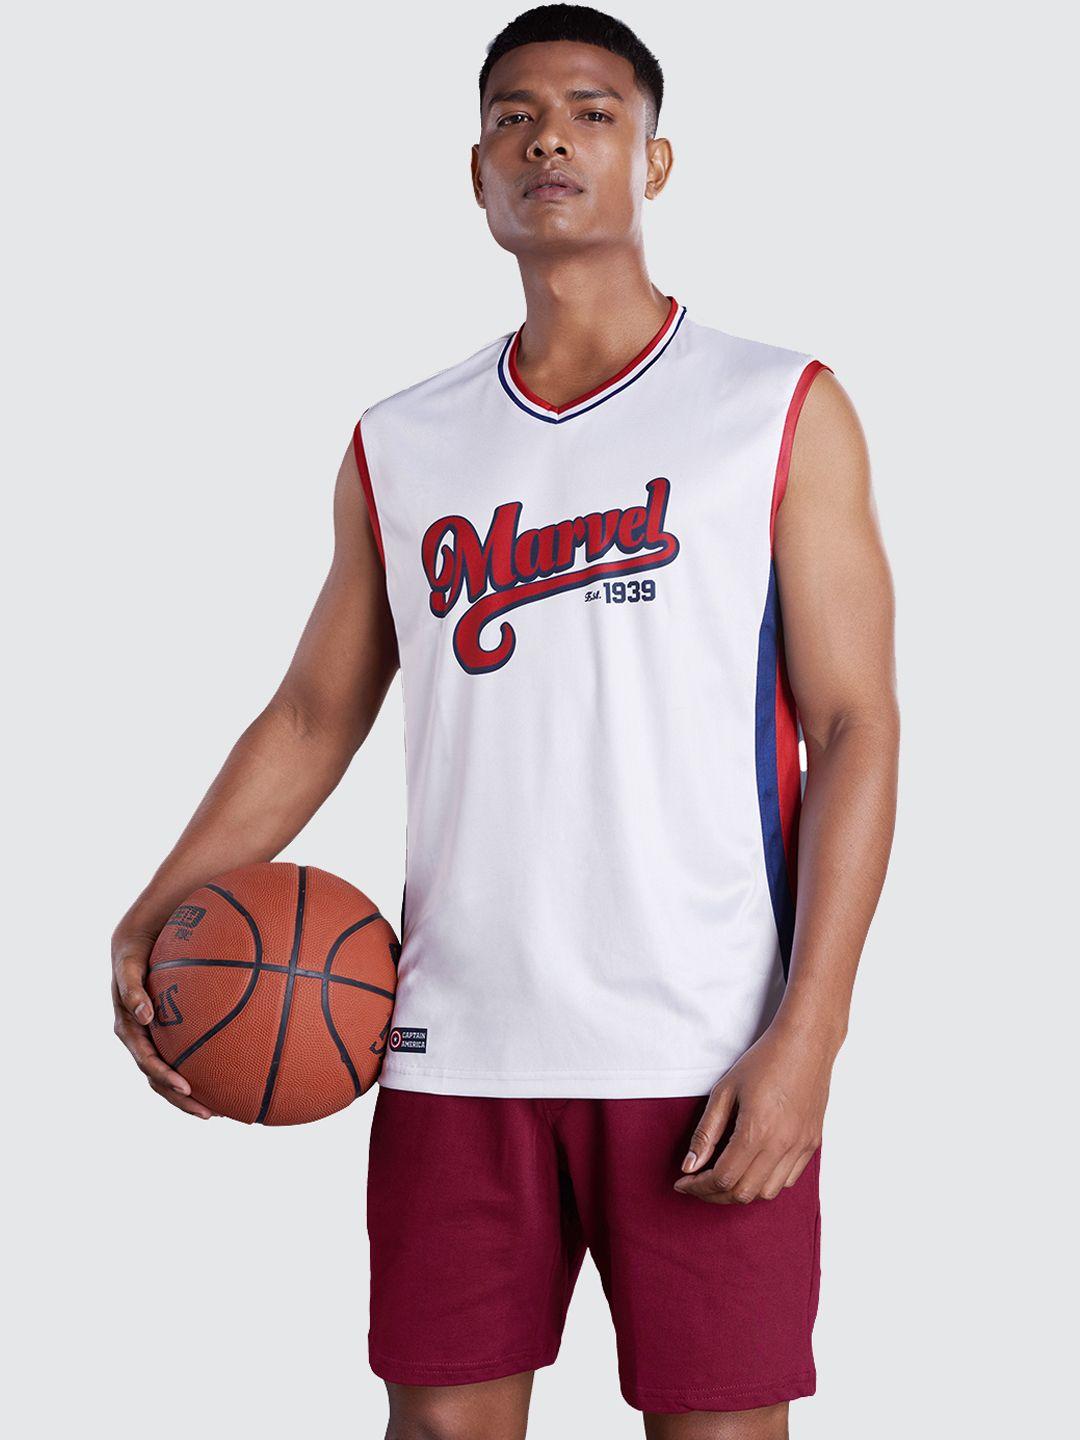 the-souled-store-men-white-&-red-captain-america-basketball-printed-gym-vest